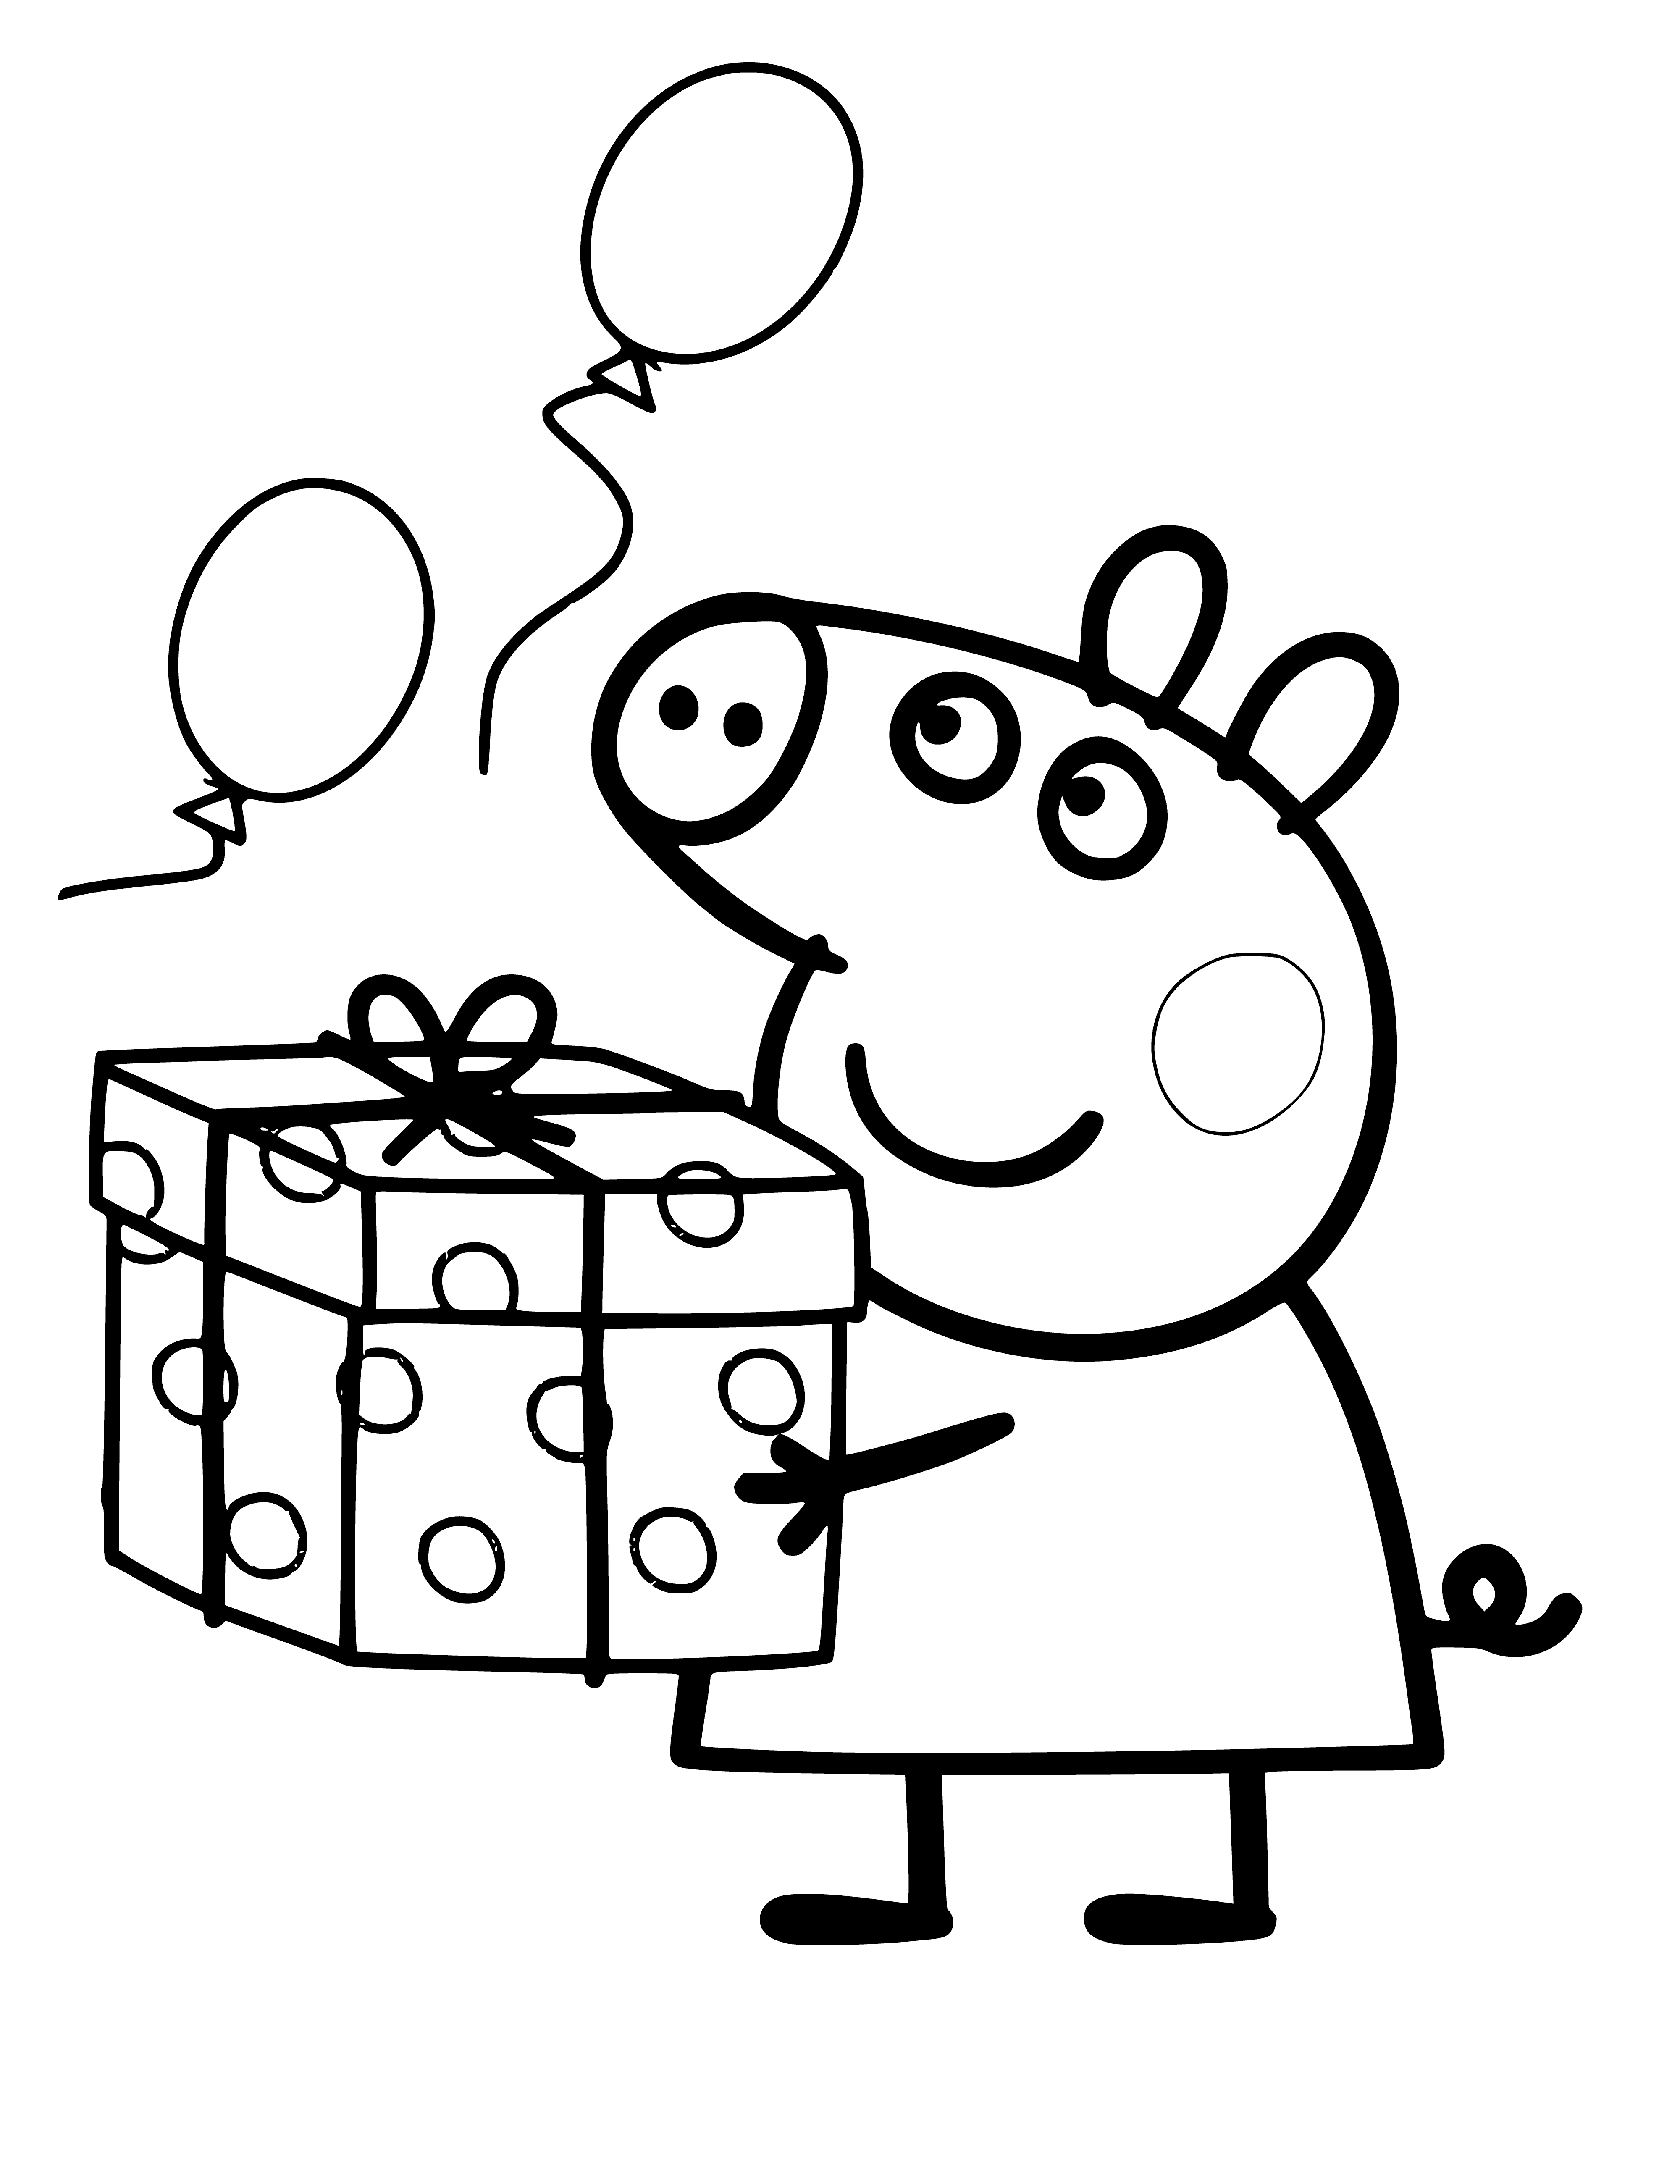 coloring page: Girl with blonde hair and pink dress surrounded by presents, smiling happily.